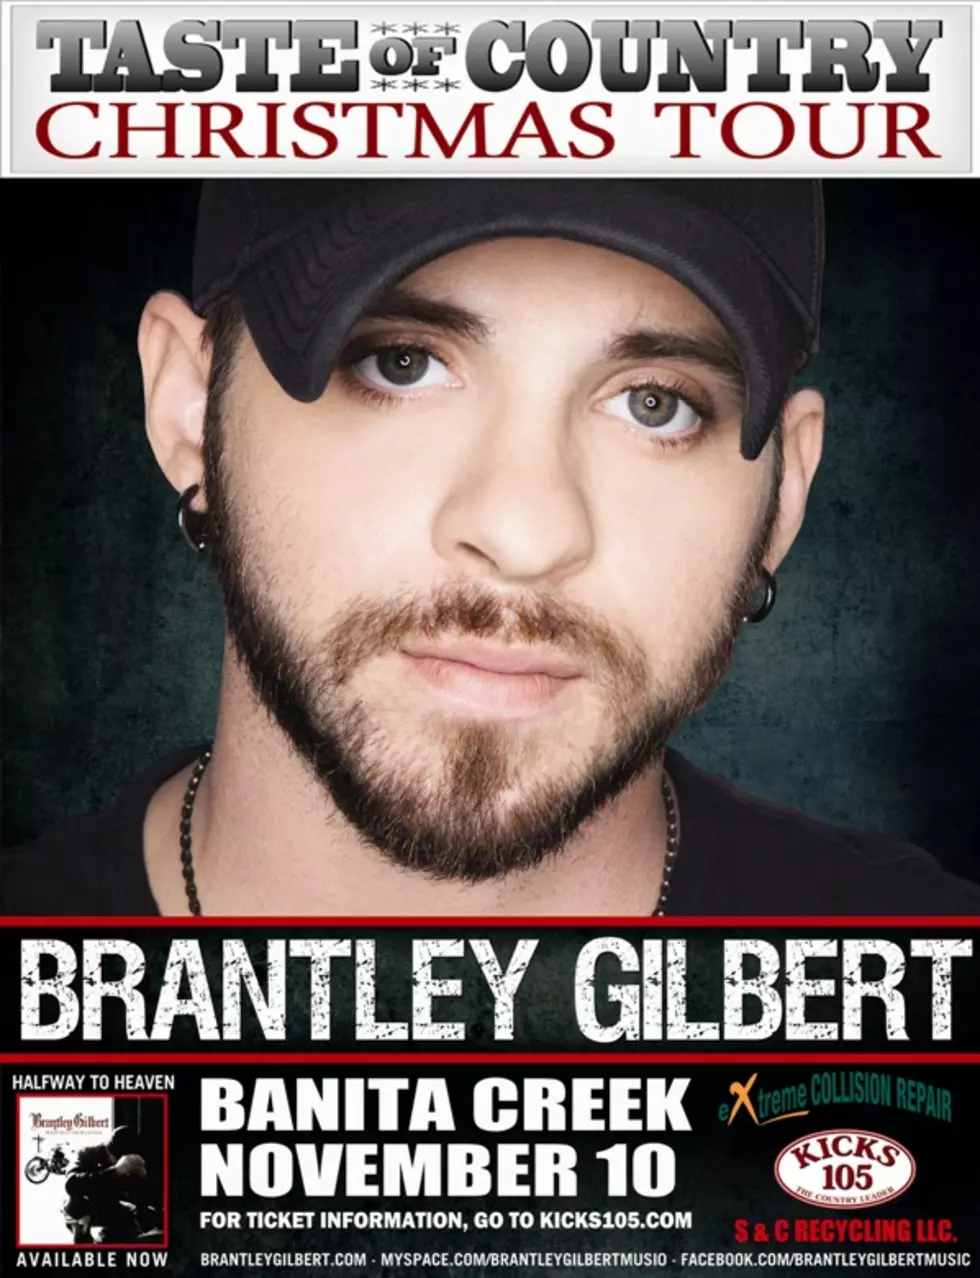 CMA Awards Nominee Brantley Gilbert Coming To Town – Win Tickets Today!!